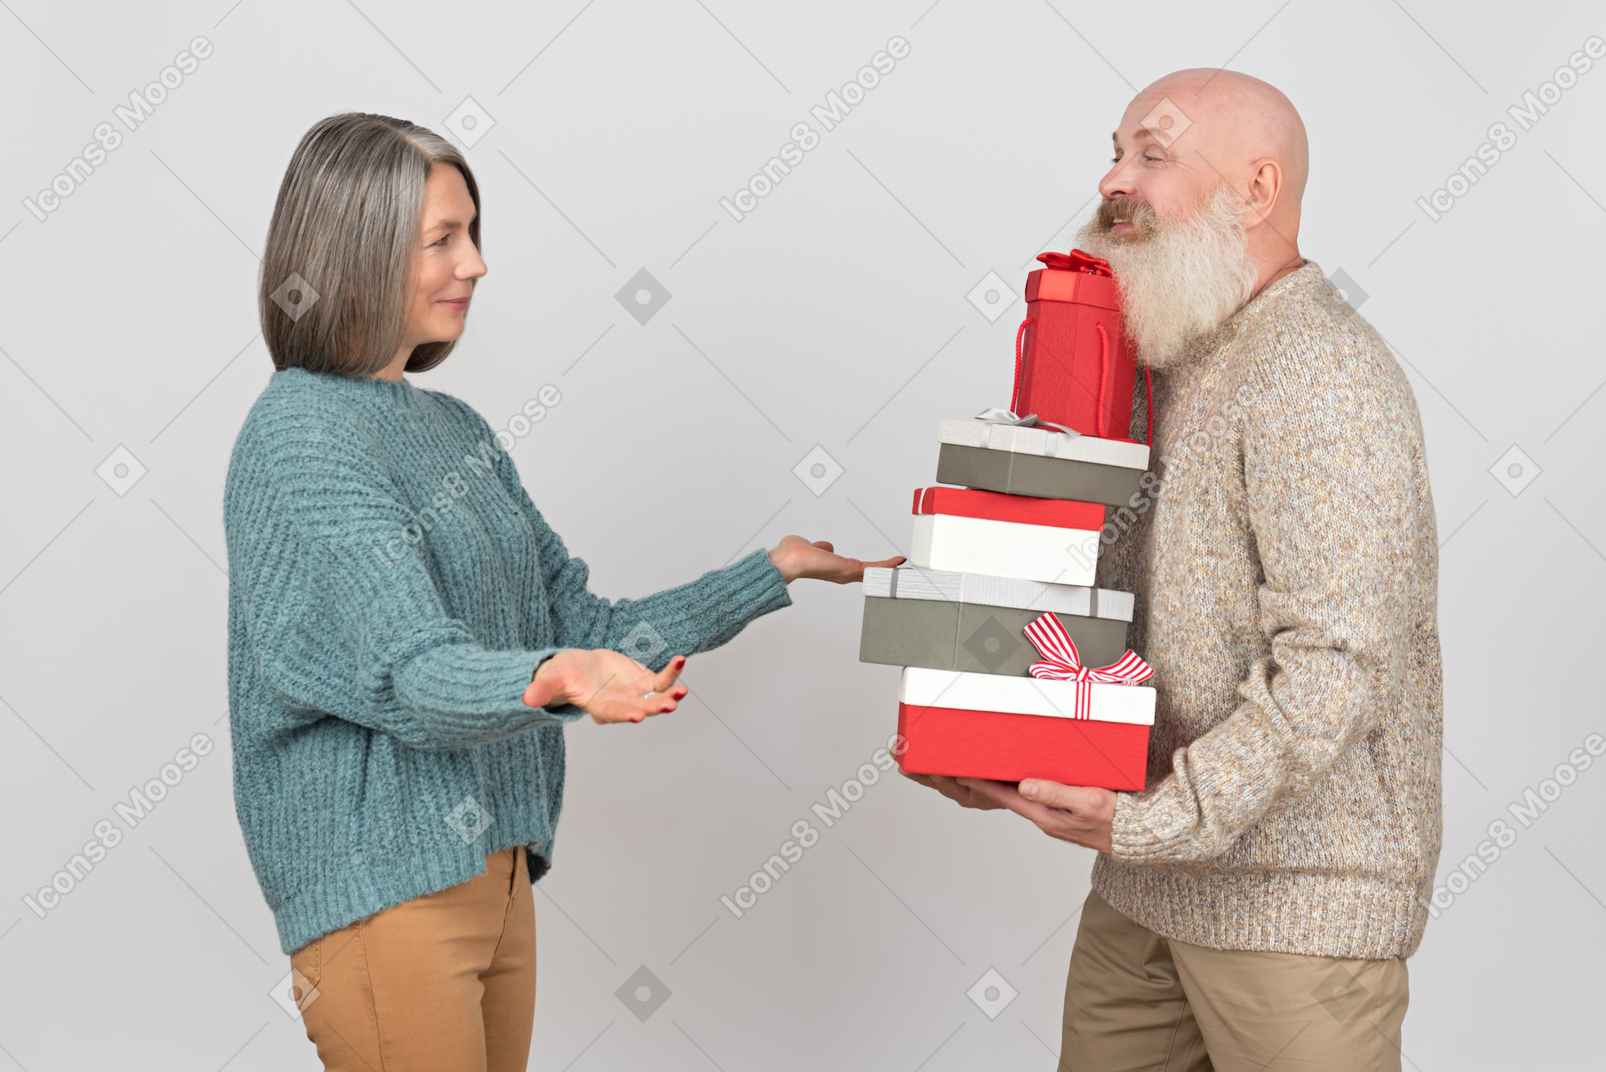 Aged man giving gifts to an elegant mature woman